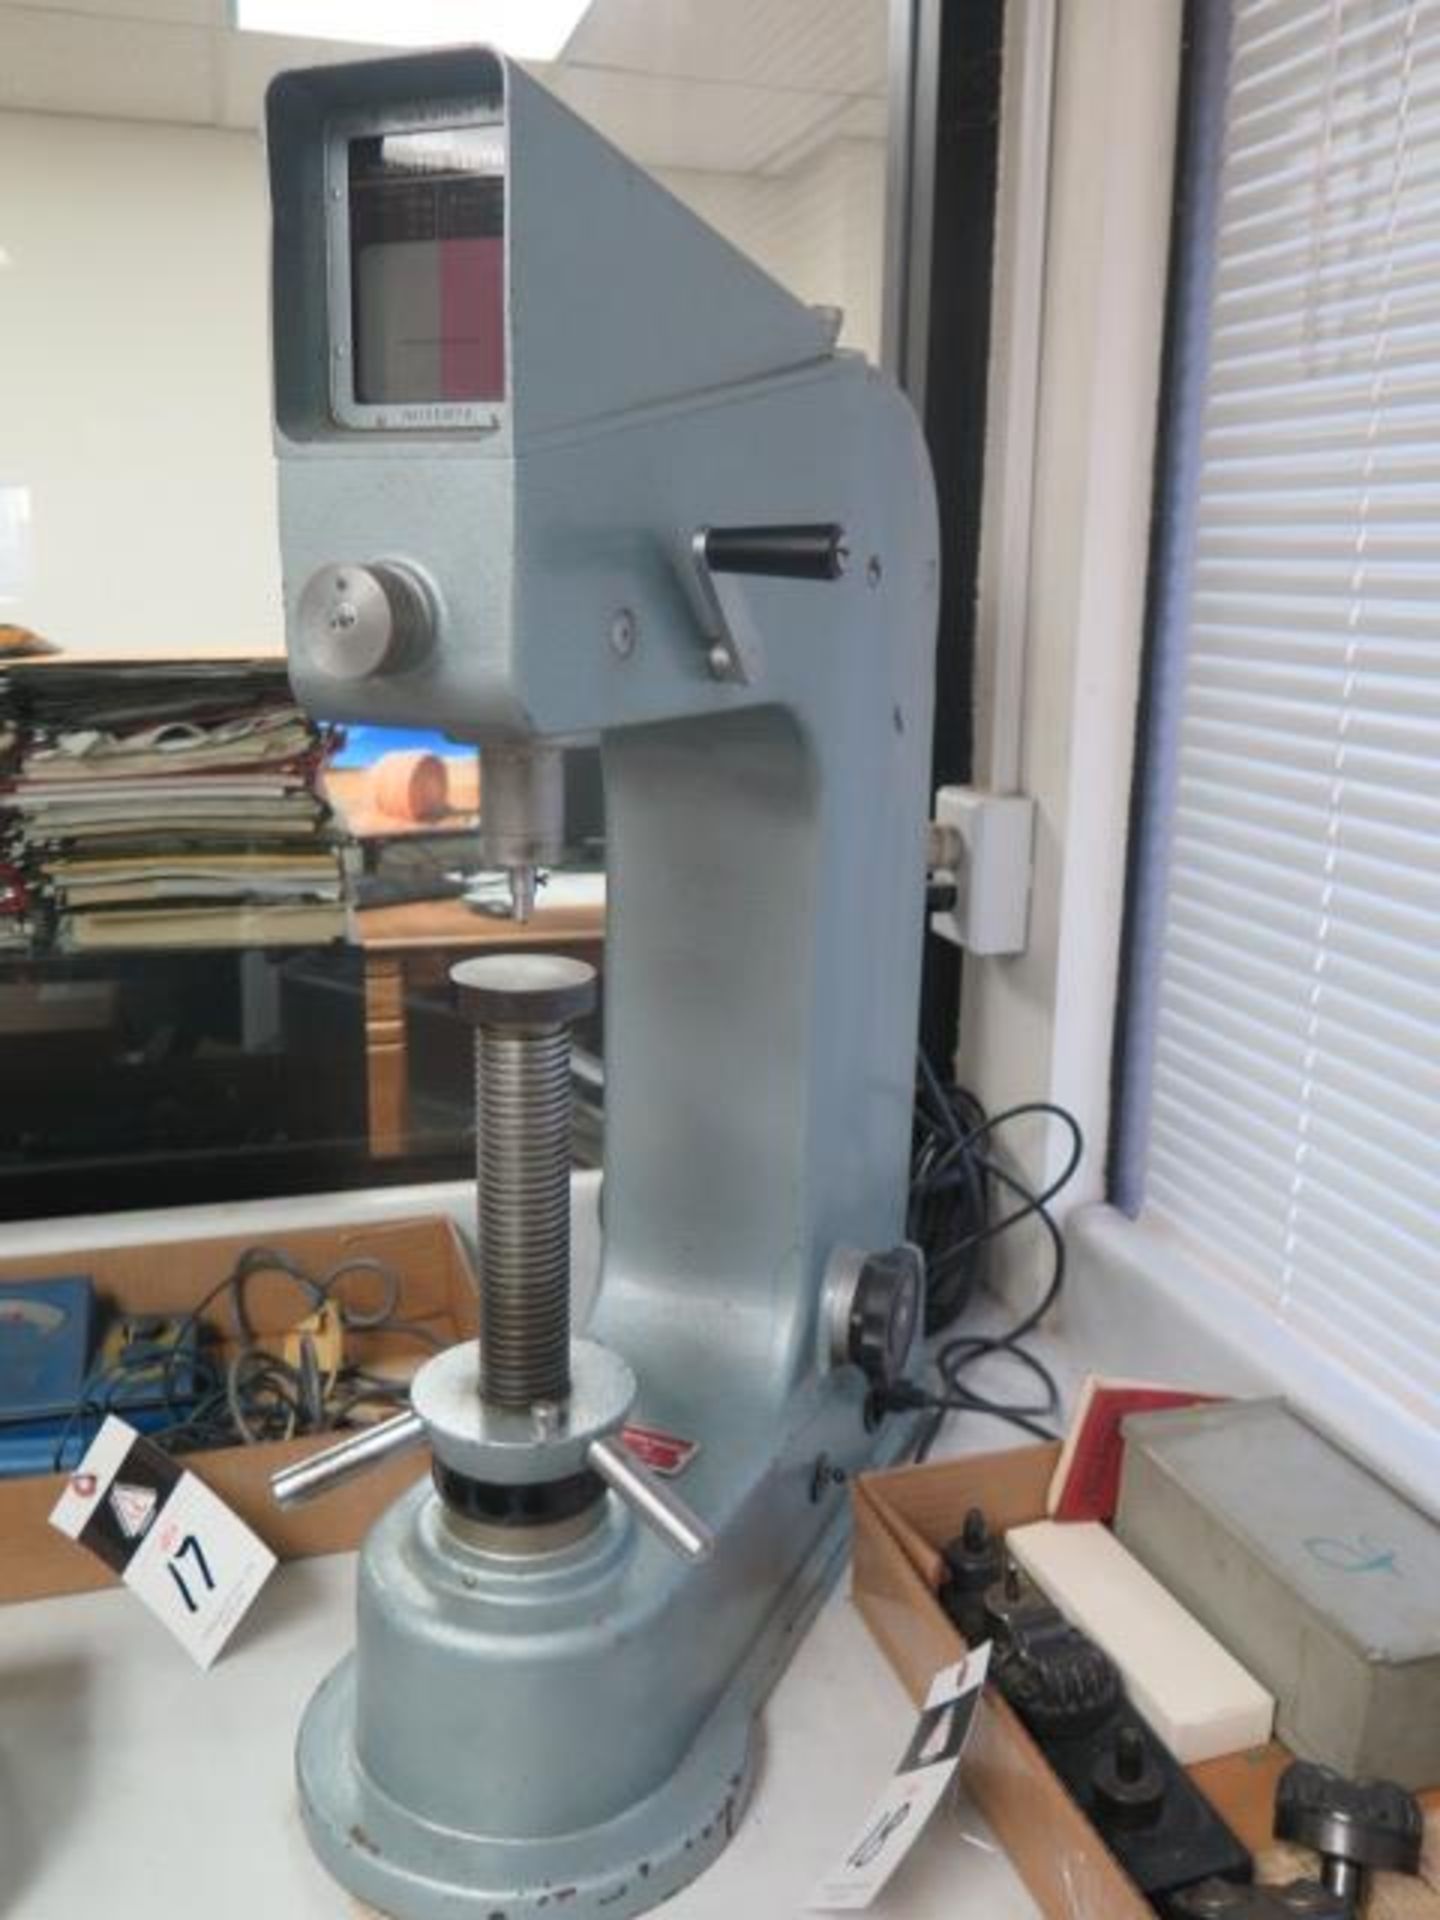 TMI Hardness Tester s/n 105876 w/ Accessories (SOLD AS-IS - NO WARRANTY)